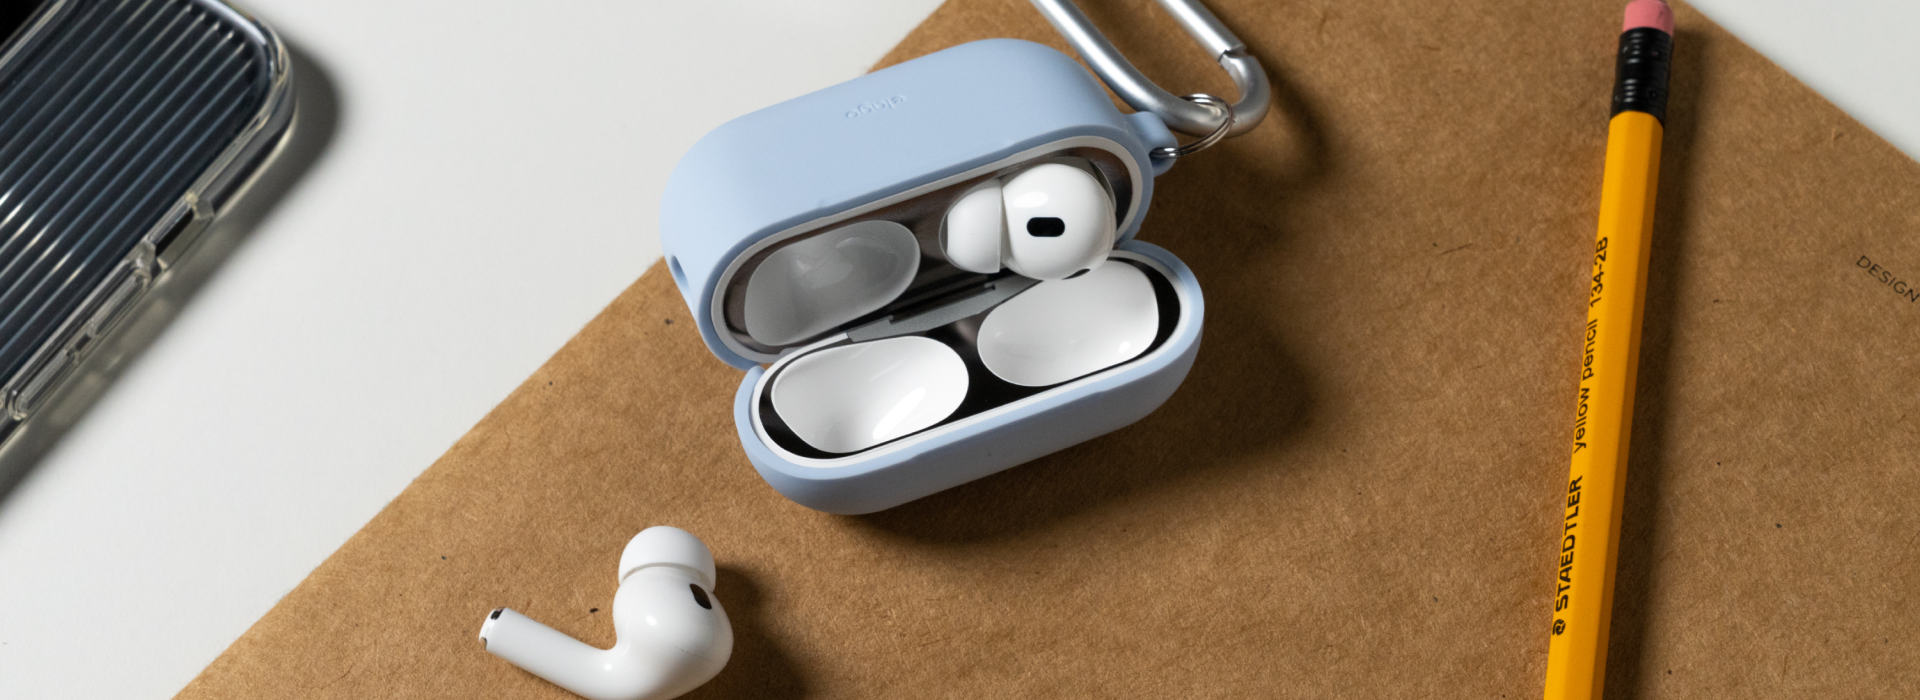 How to attach a Dust Guard to AirPods